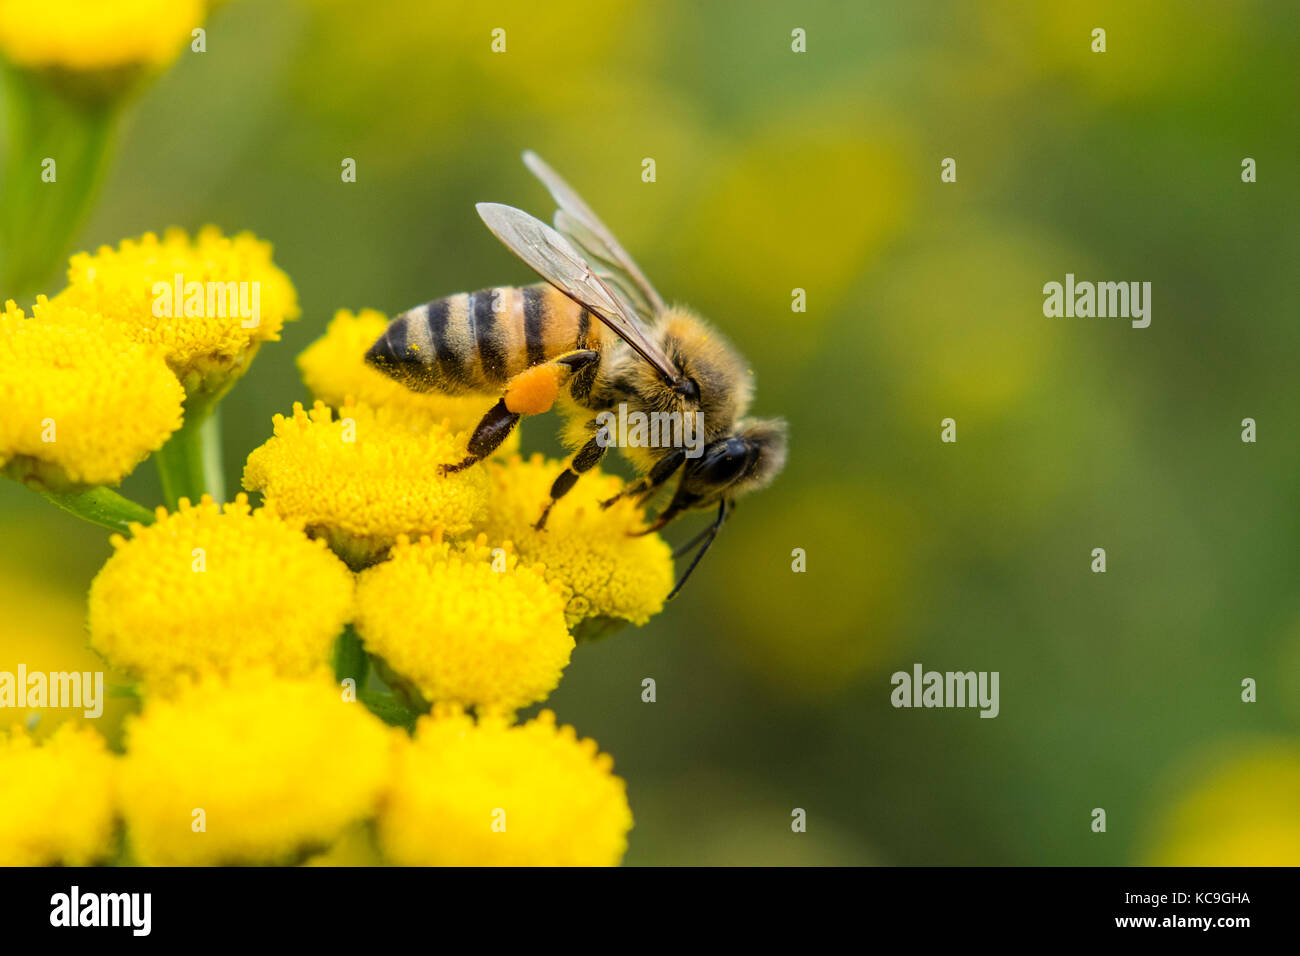 Close-Up Of European Honey Bee Or Apis Mellifera With Pollen Sac Collecting Pollen From Yellow Flower Stock Photo